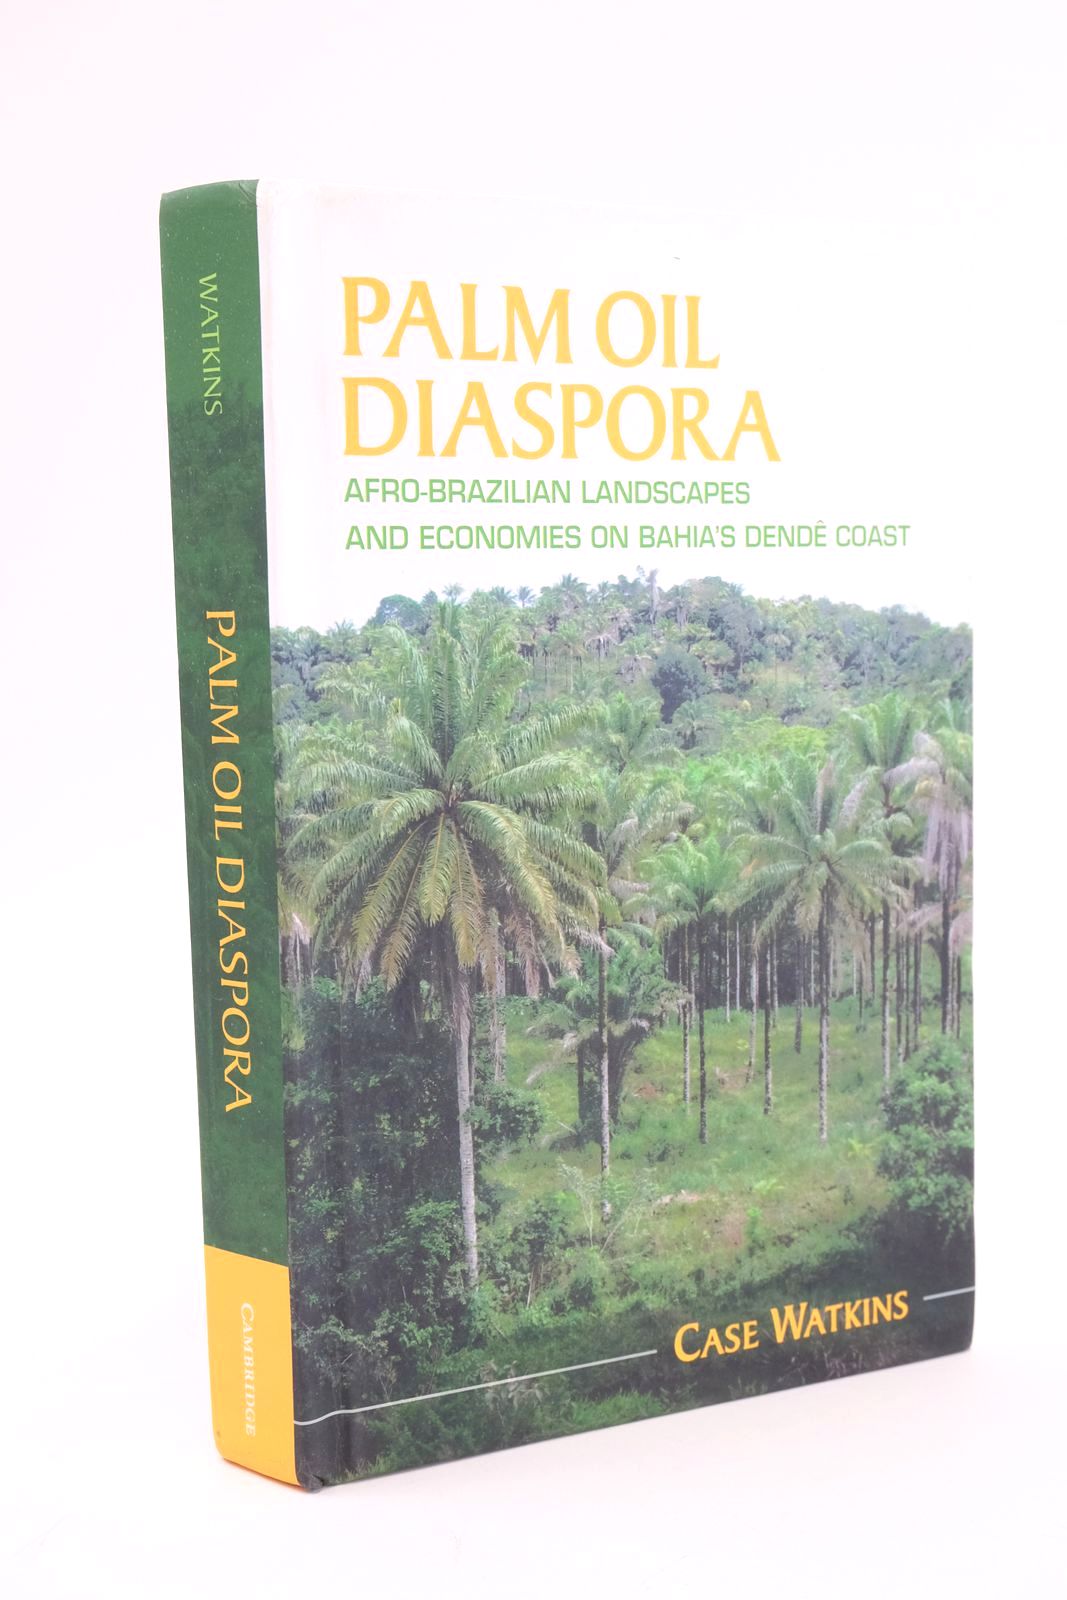 Photo of PALM OIL DIASPORA: AFRO-BRAZILIAN LANDSCAPES AND ECONOMIES ON BAHIA'S DENDE COAST written by Watkins, Case published by Cambridge University Press (STOCK CODE: 1324951)  for sale by Stella & Rose's Books